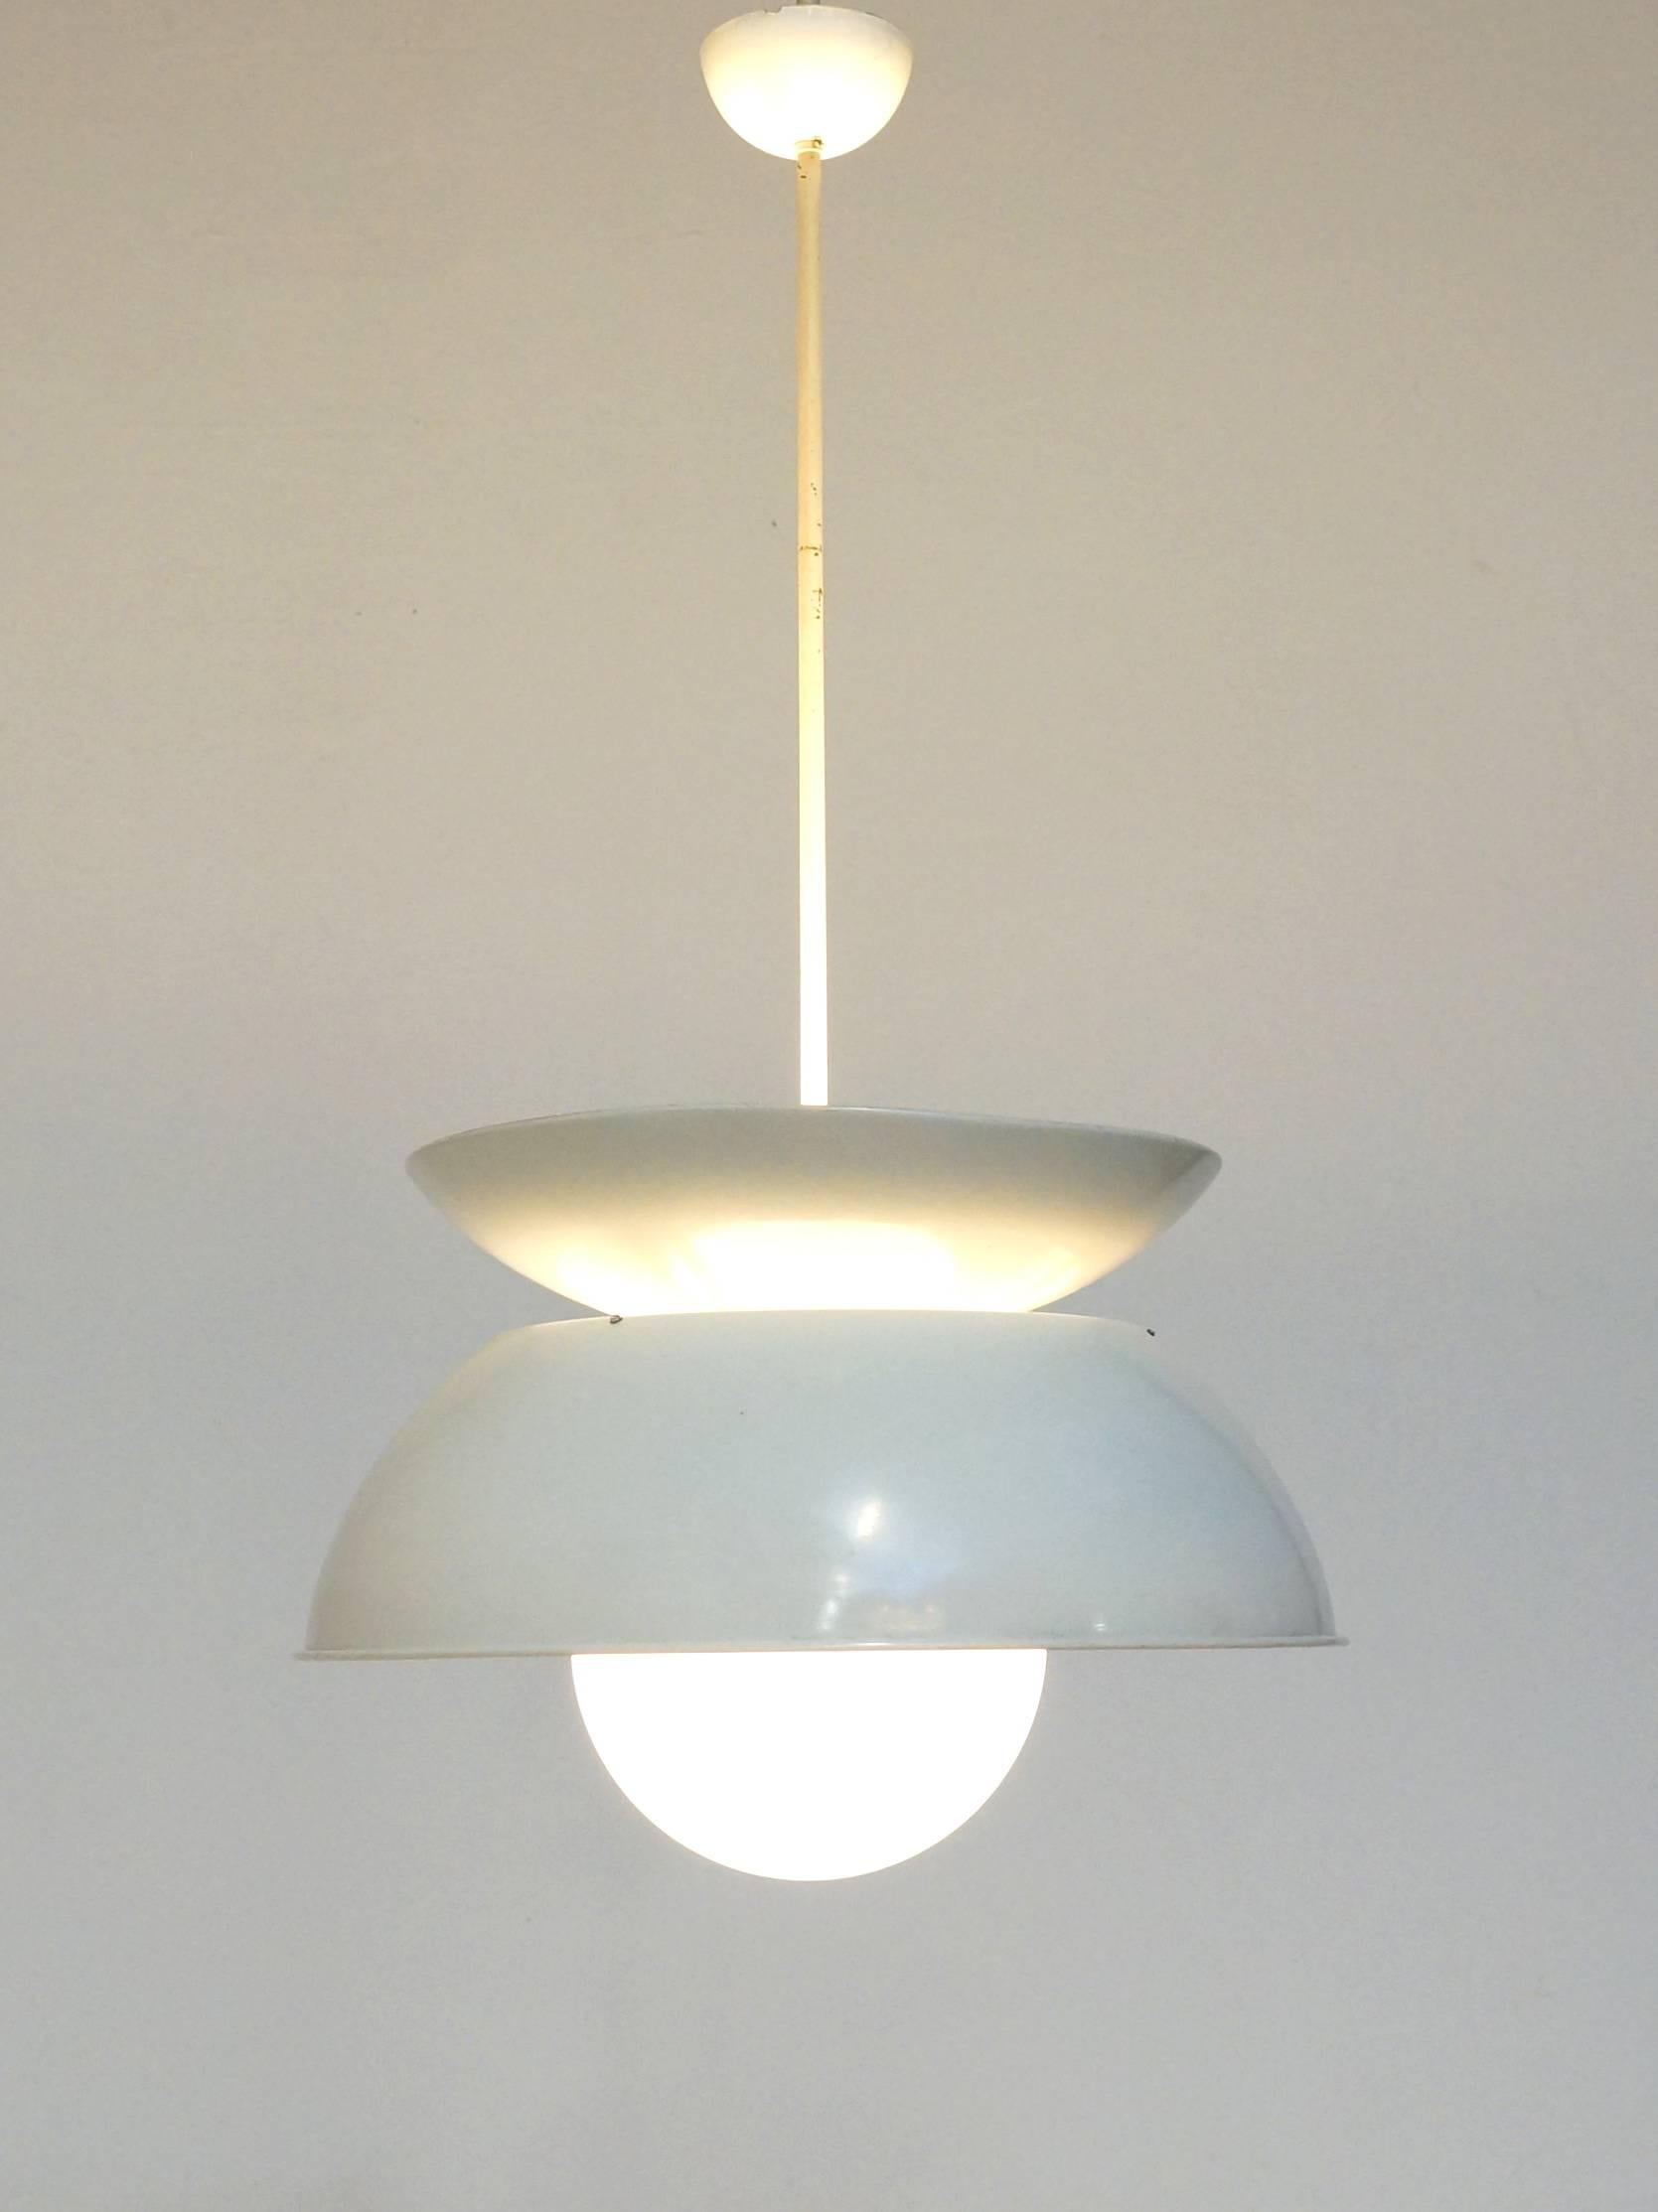 Beautiful vintage Italian pendant lamp designed by Vico Magistretti for Artemide in the 1960s. The lamp, with a diameter of 60 cm/24